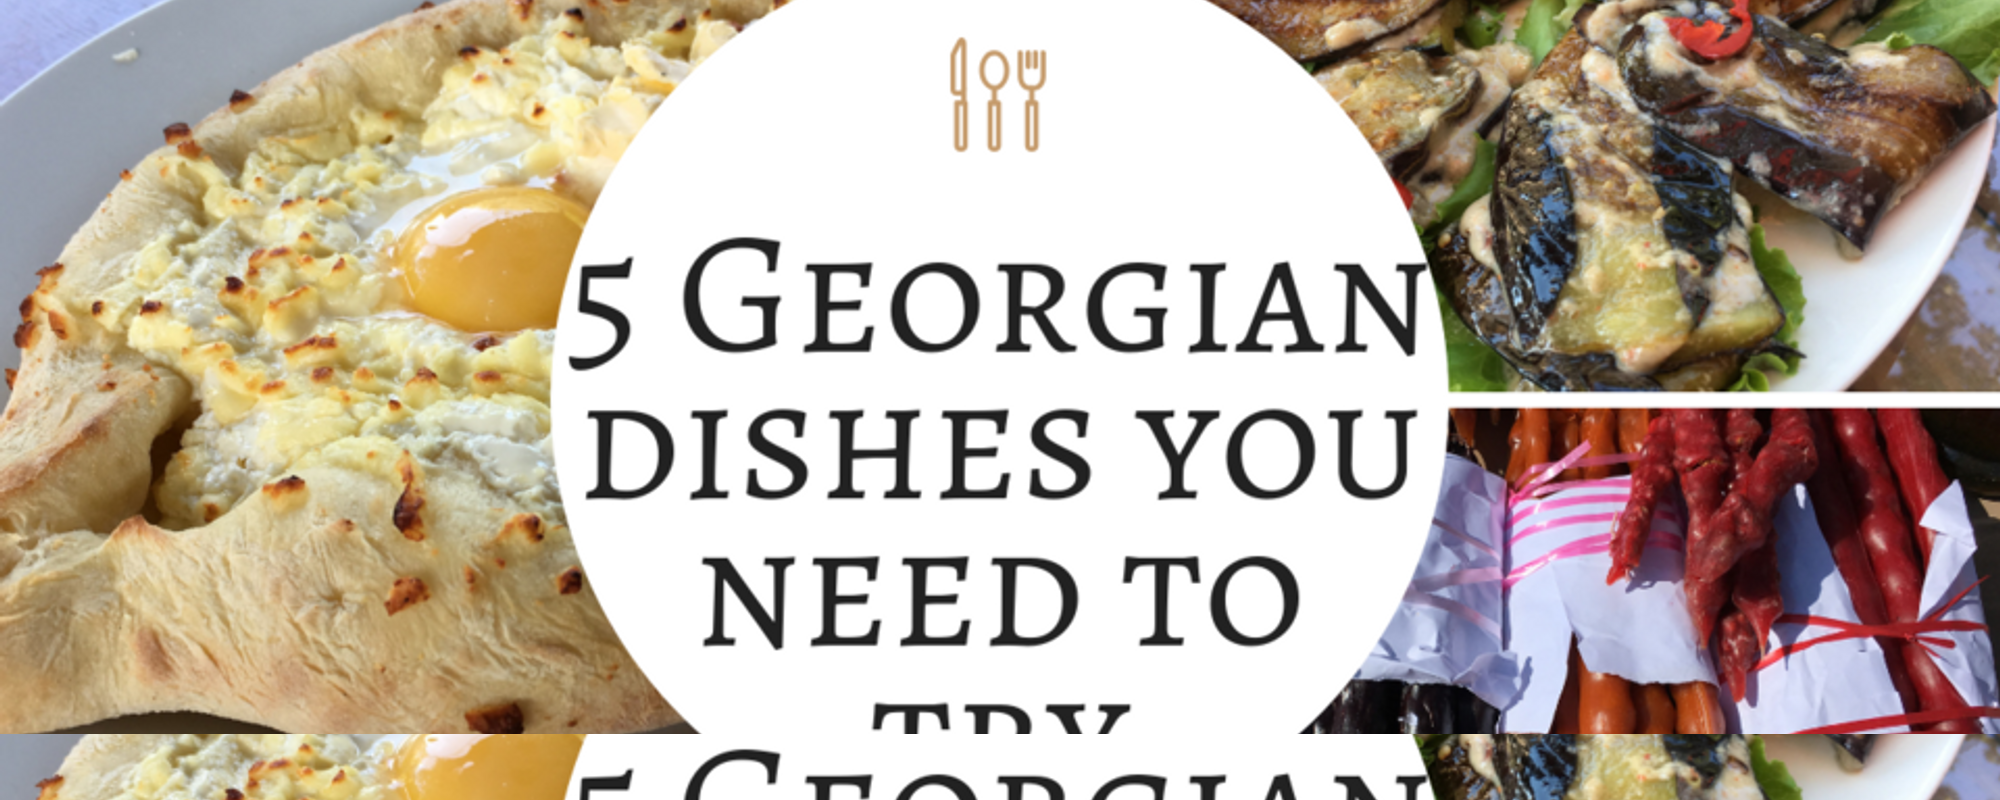 5 Georgian dishes you need to try